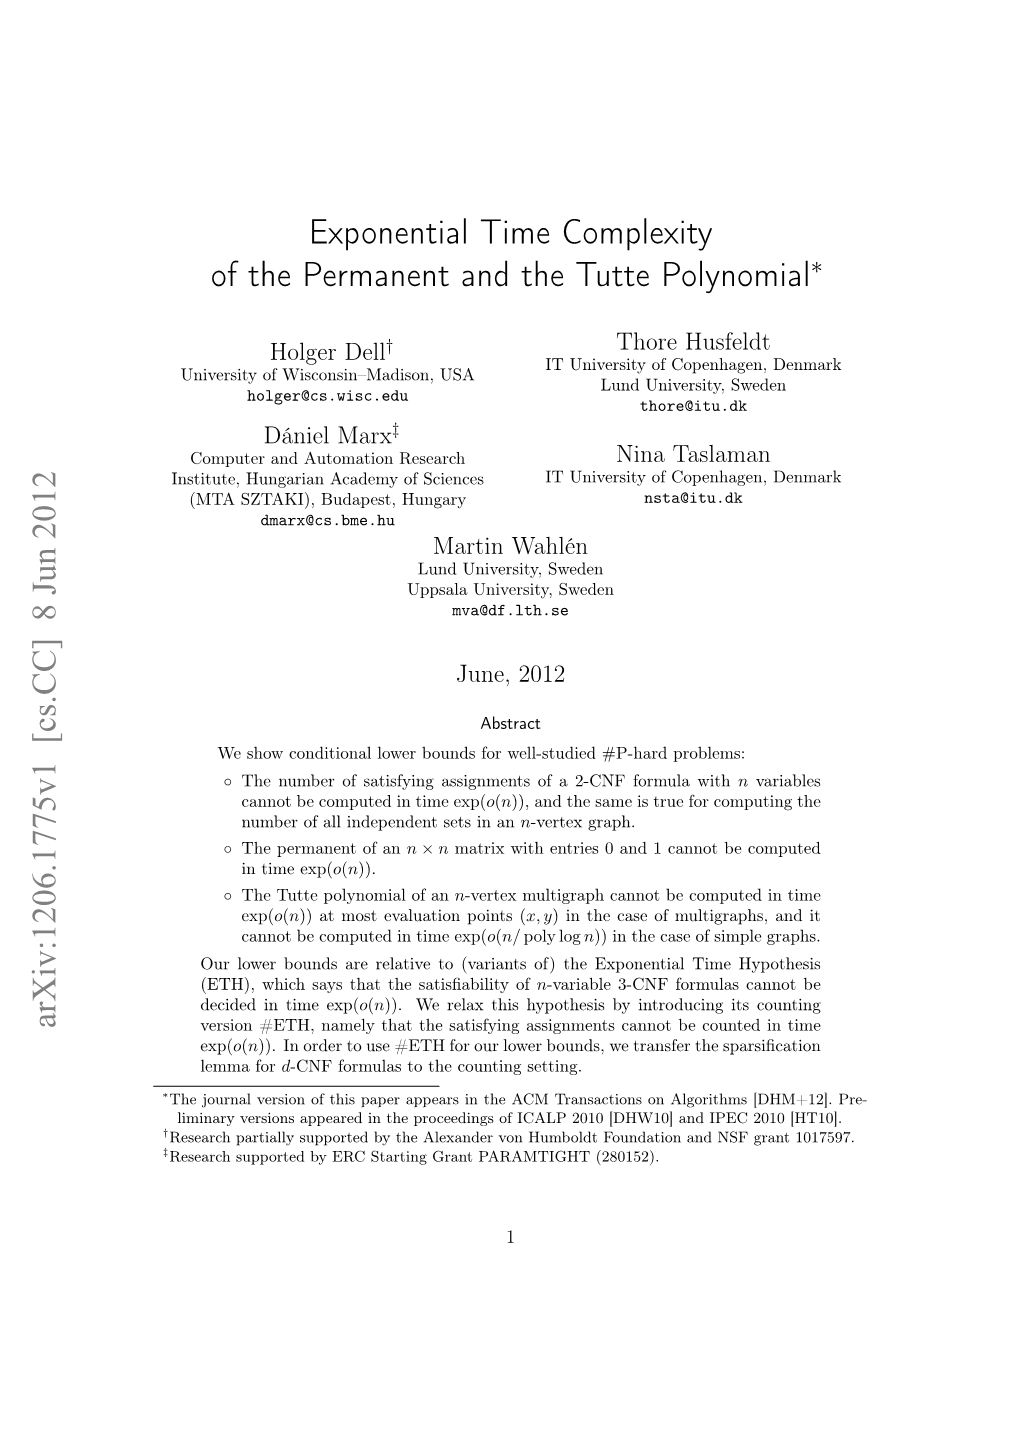 Exponential Time Complexity of the Permanent and the Tutte Polynomial∗